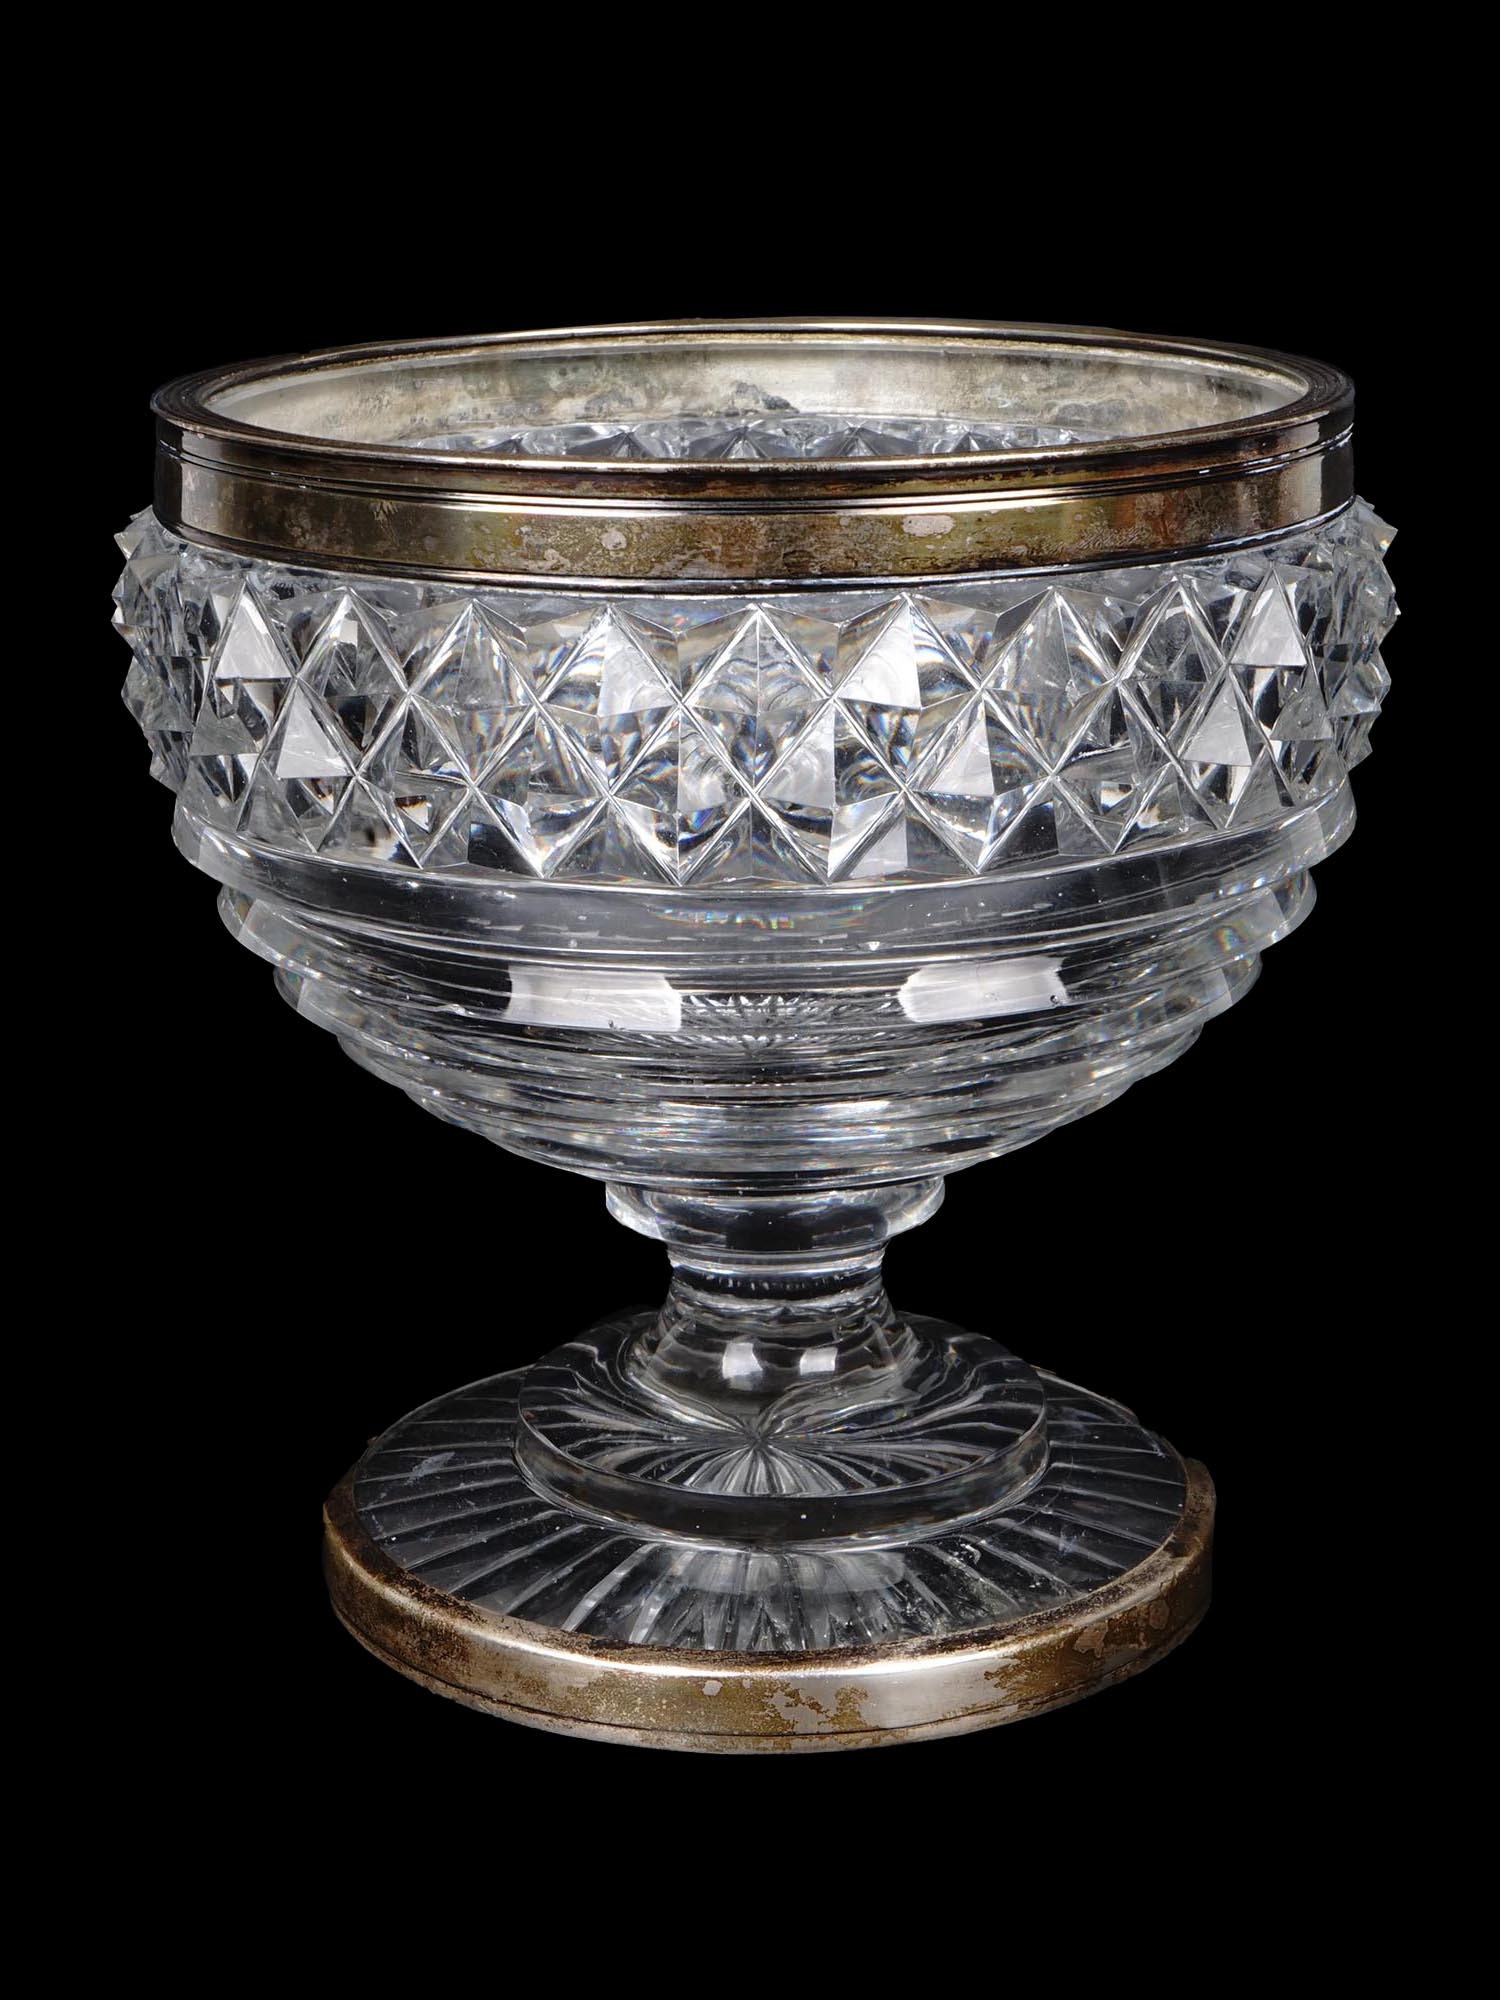 BRITISH ART DECO CUT GLASS AND SILVER CANDY BOWL PIC-0